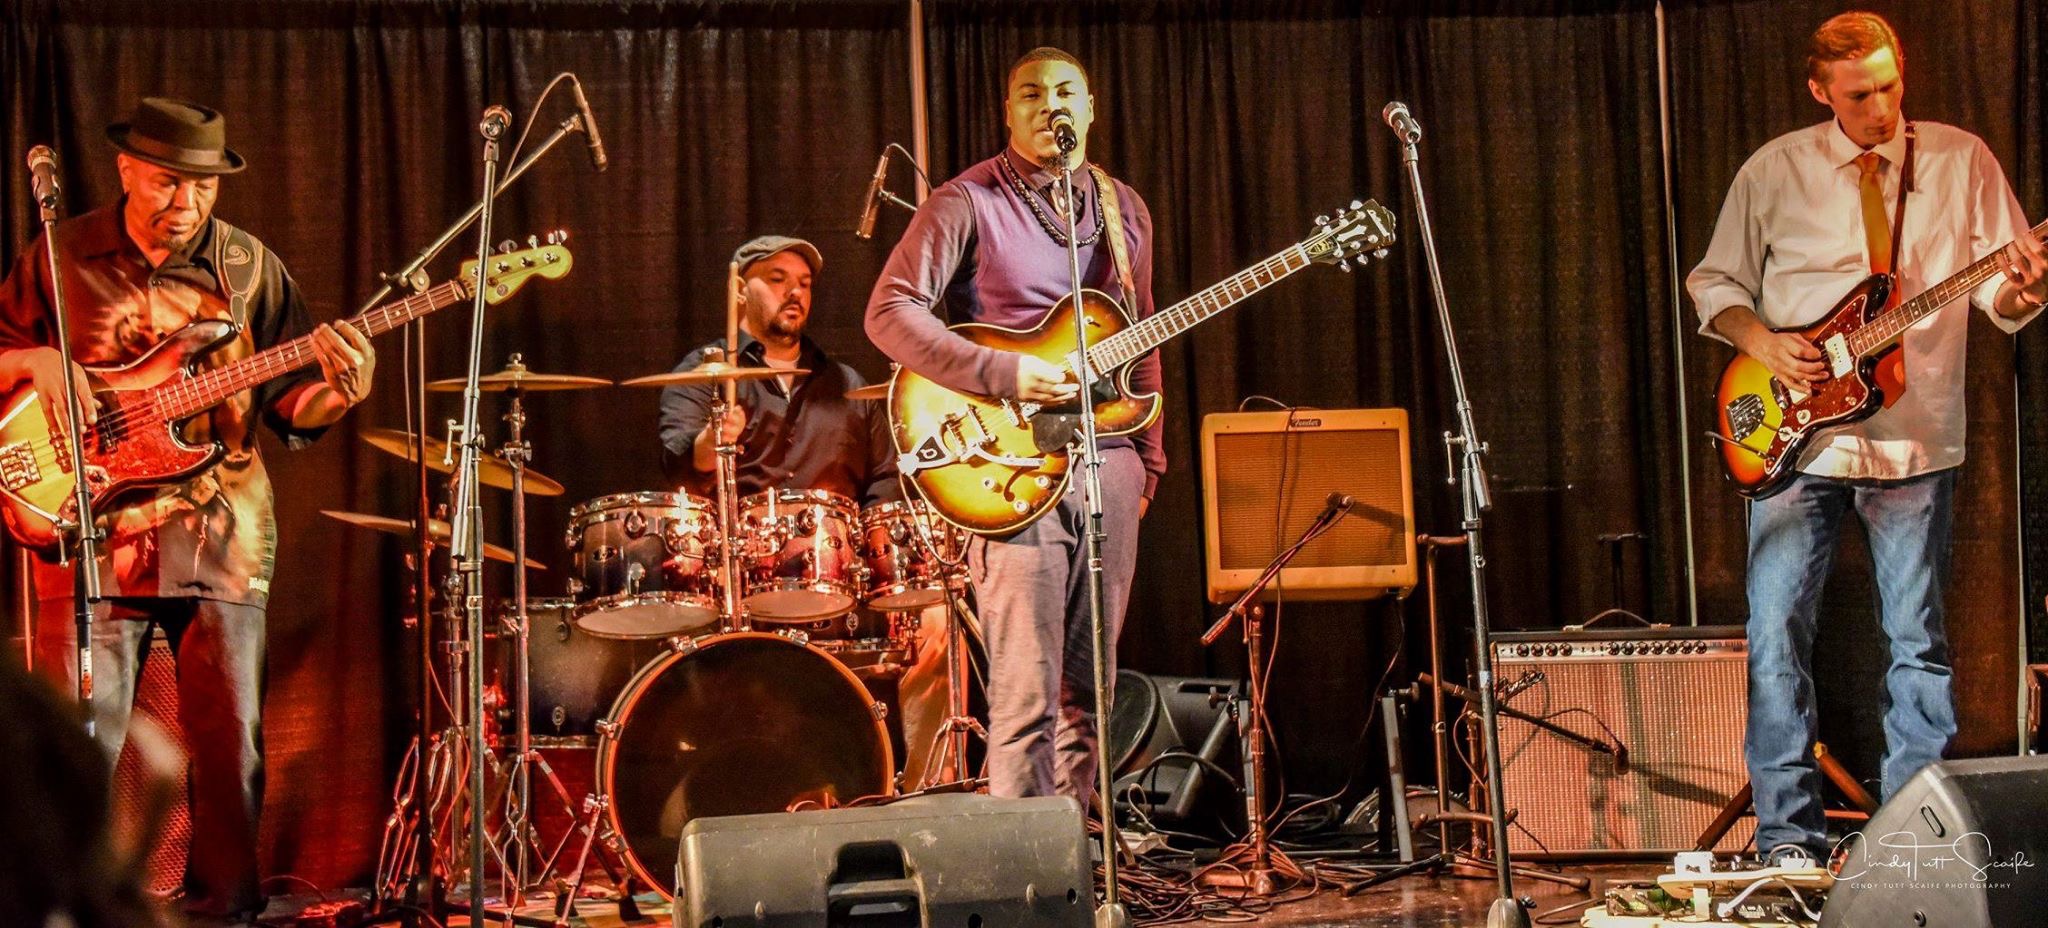 The Brian Austin Band with Marcus “Mookie” Cartwright at the Bobby Rush Tribute on Friday, November 30, 2018, in Pine Bluff, AR. Credit: Cindy Tutt Scaife Photography